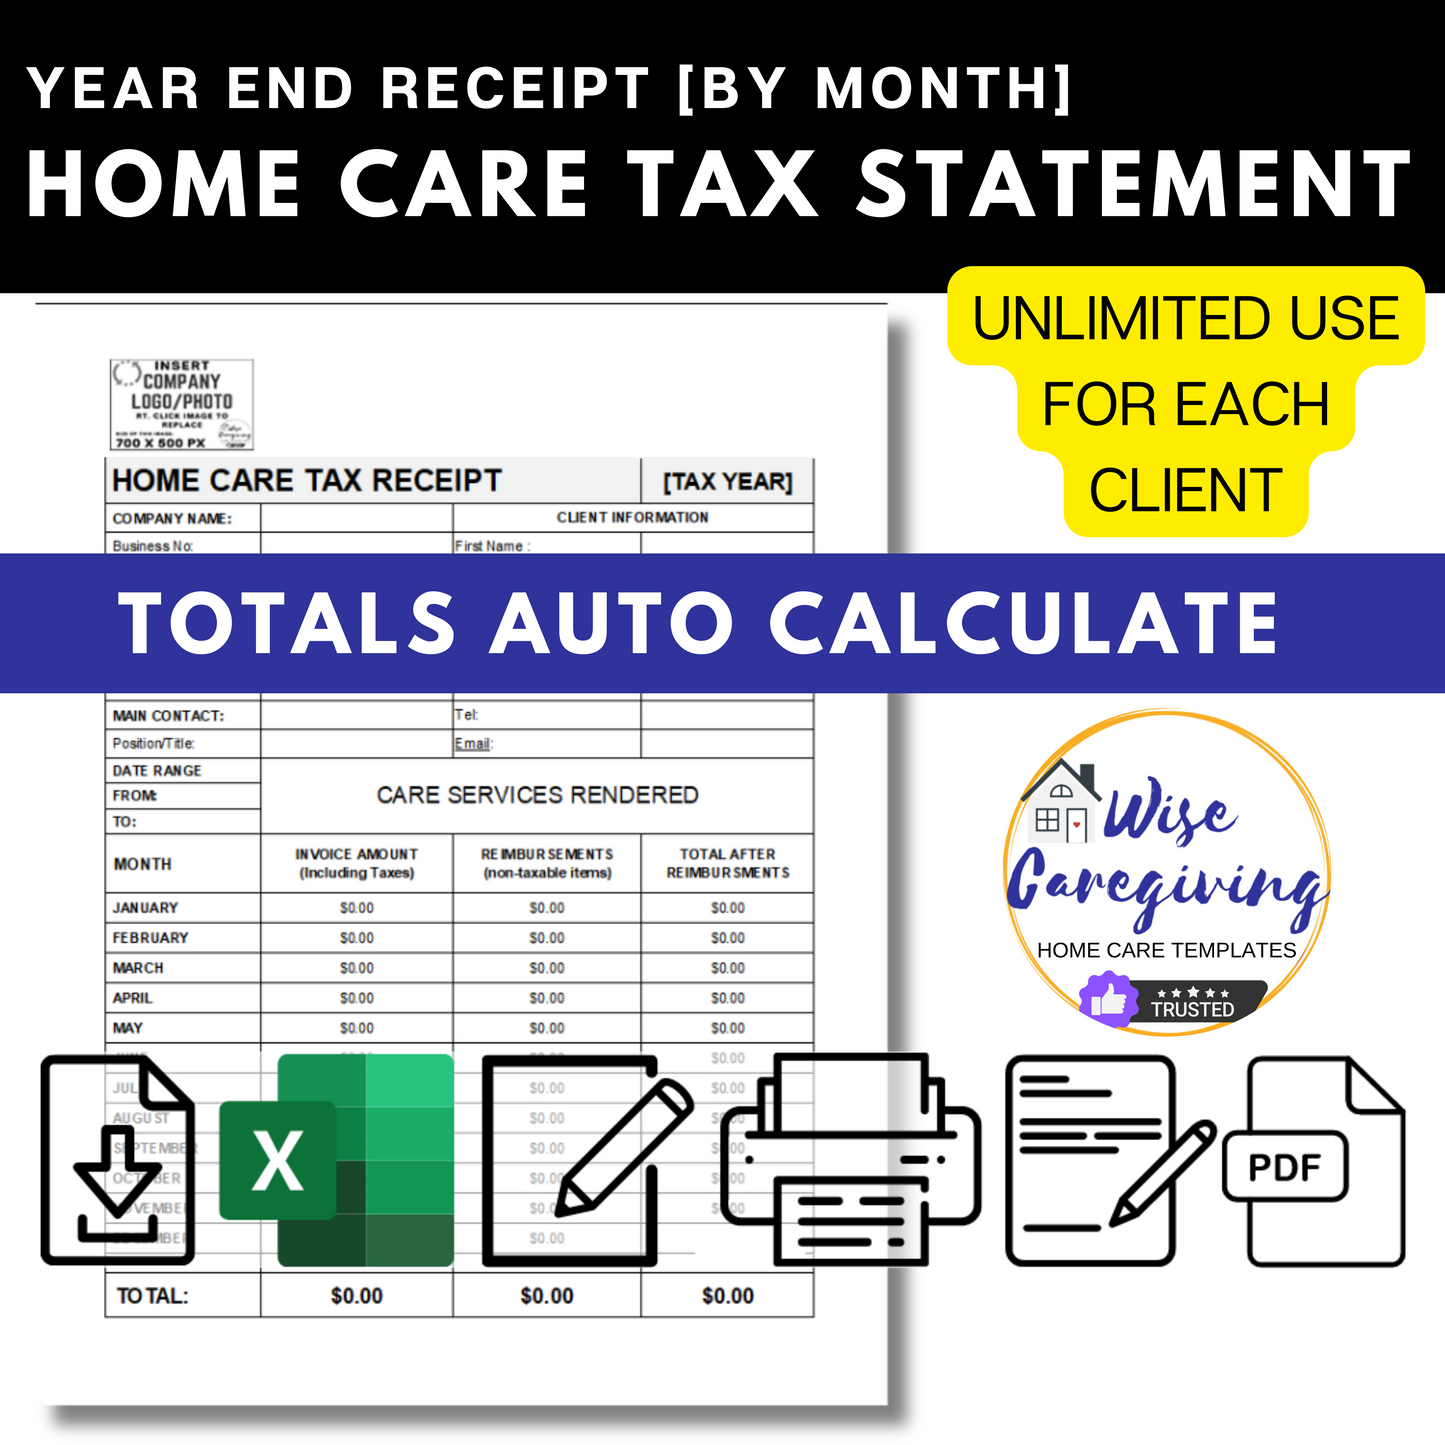 Home Care Tax Statement Template